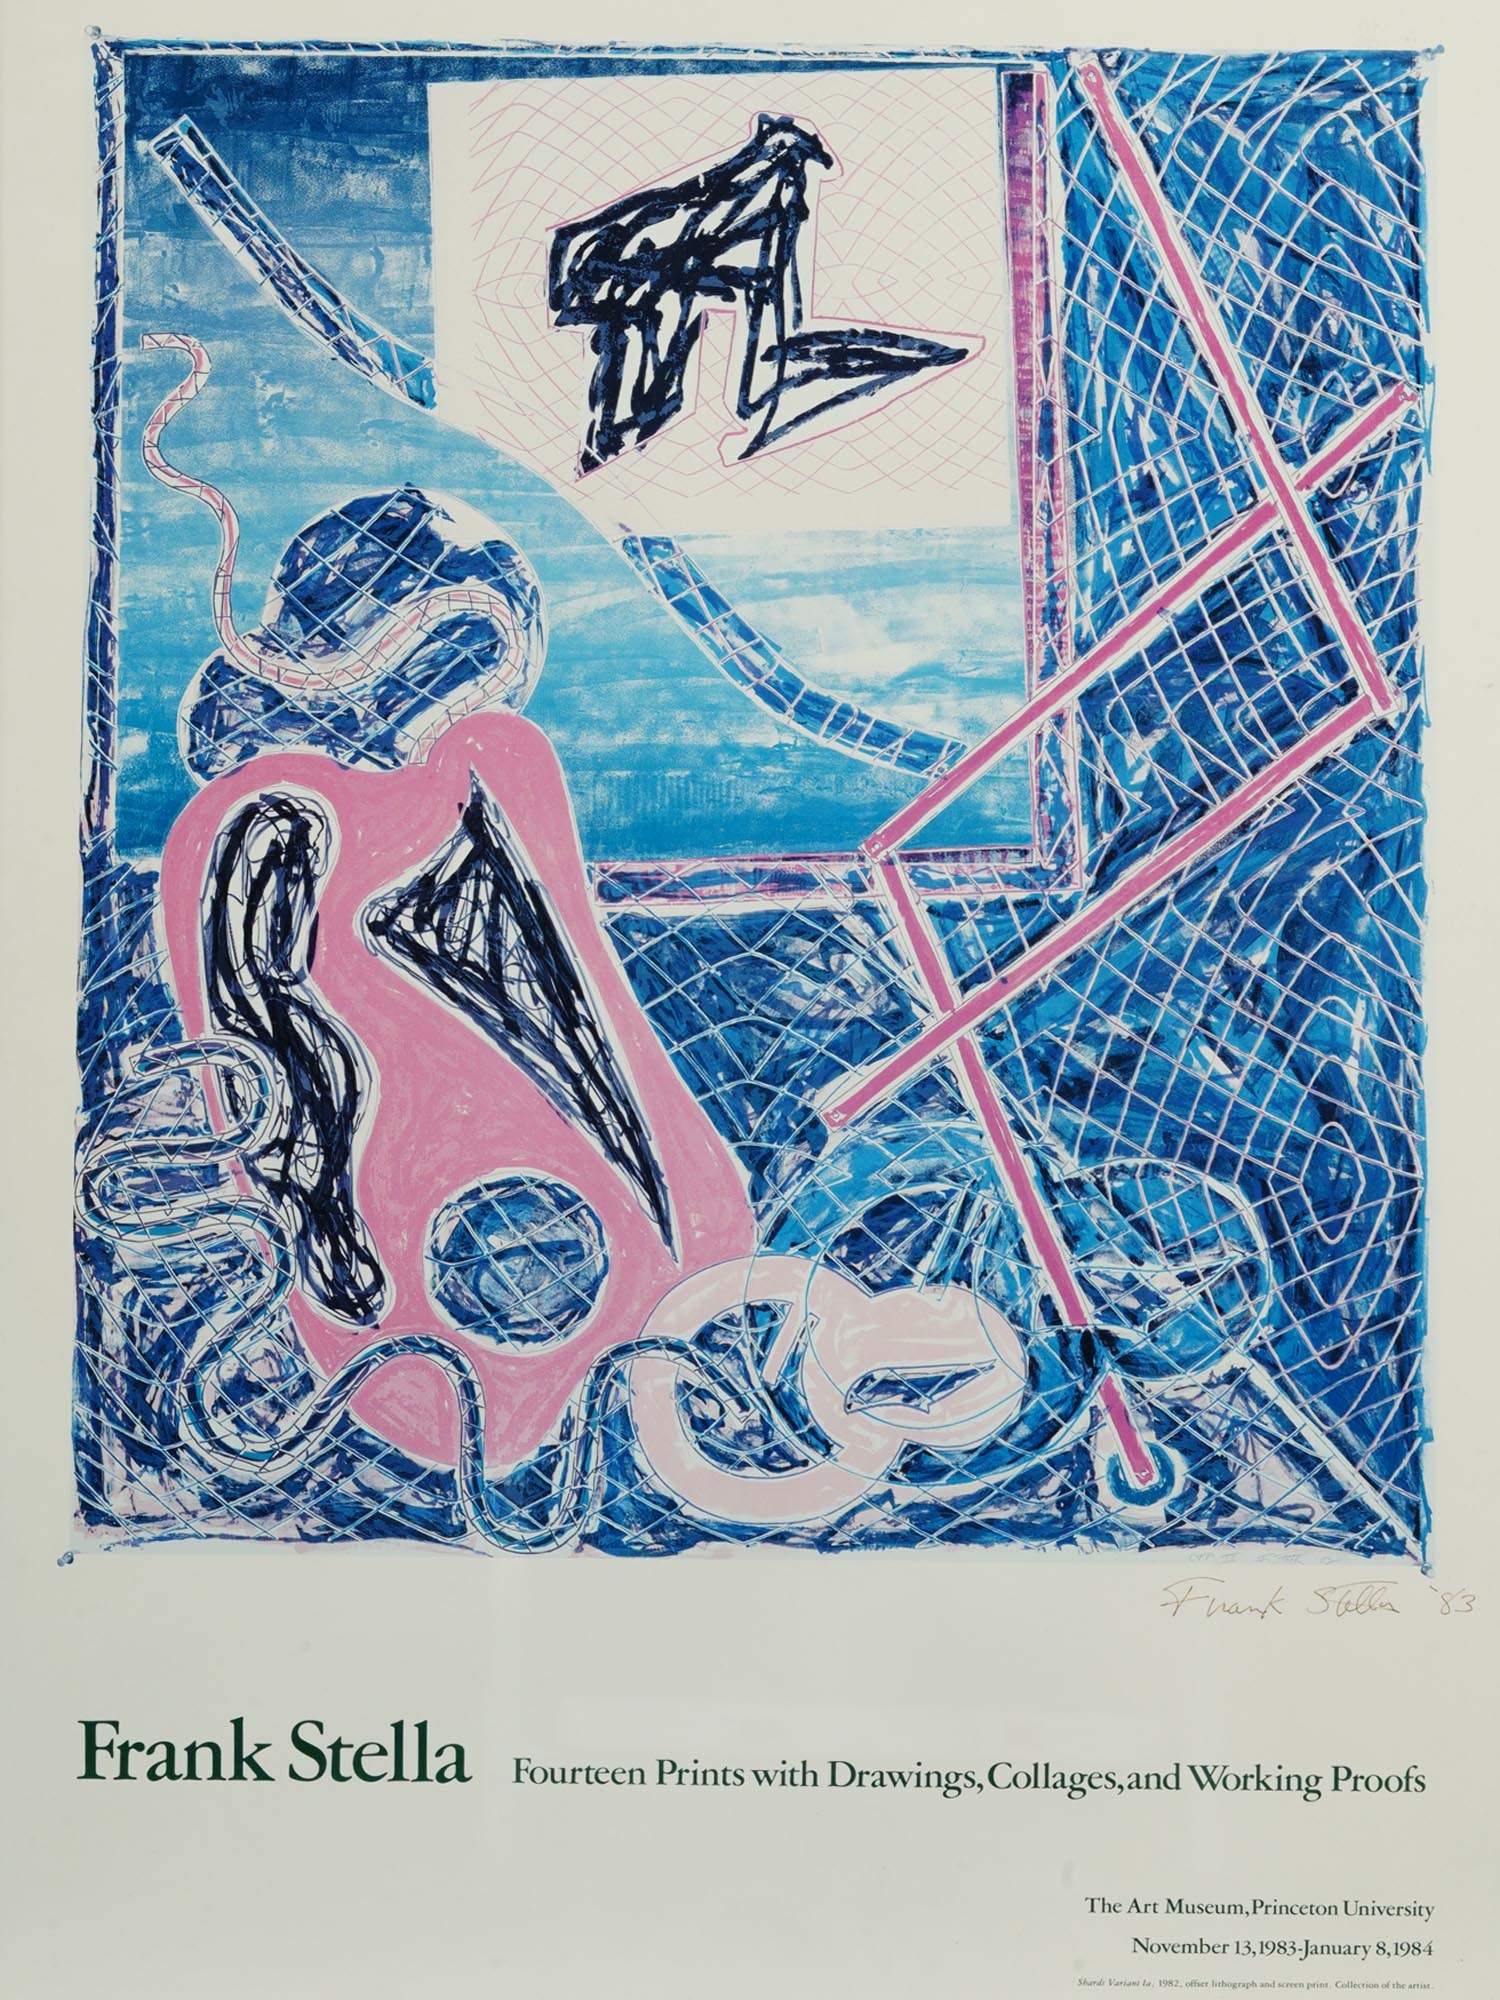 FRANK STELLA SIGNED LITHOGRAPH POSTER PIC-1